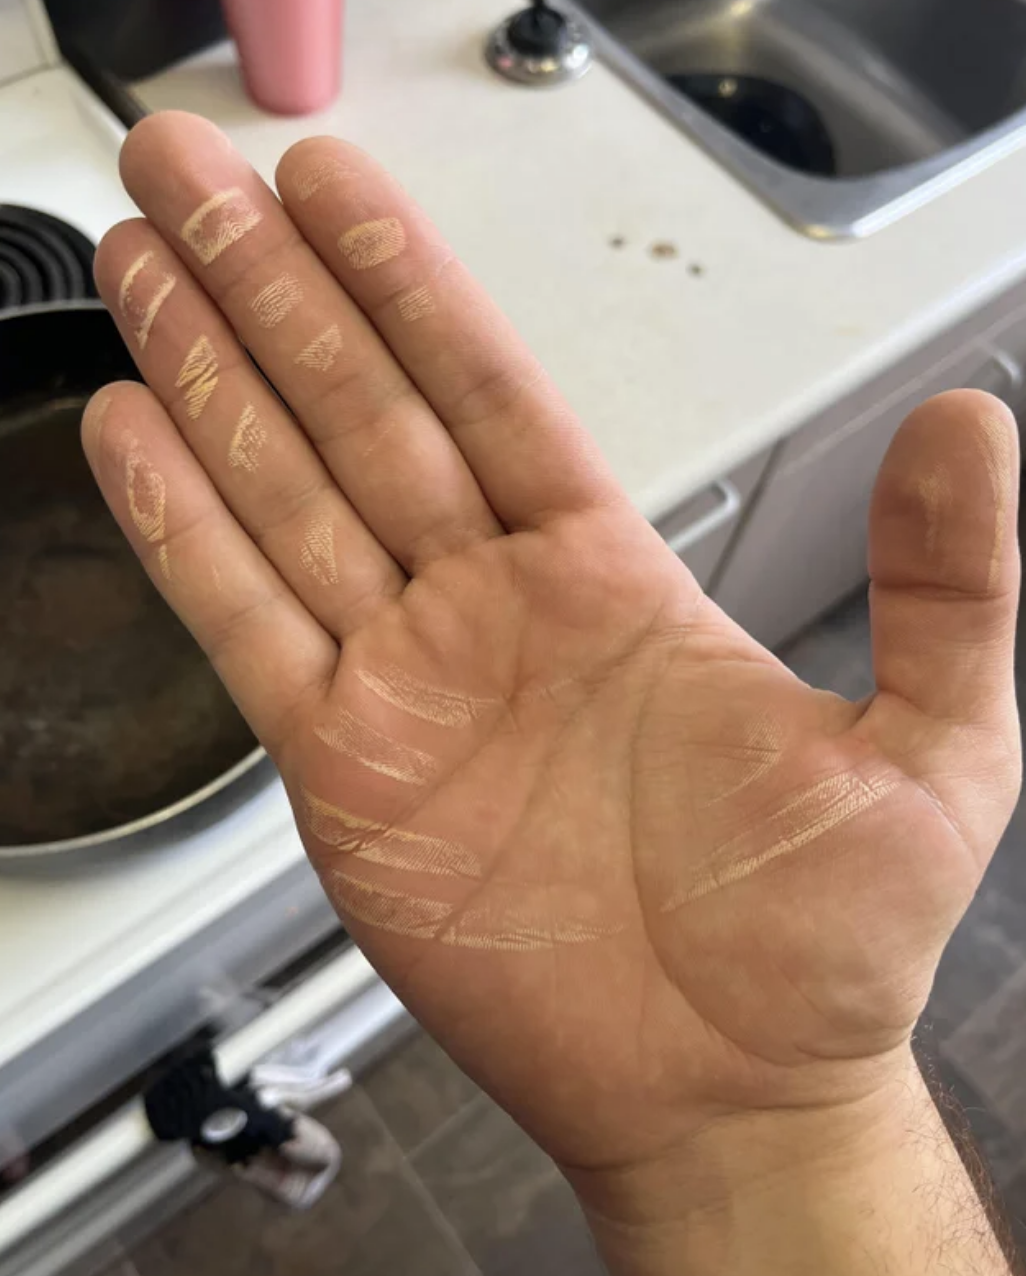 Someone&#x27;s hand with marks from the stove